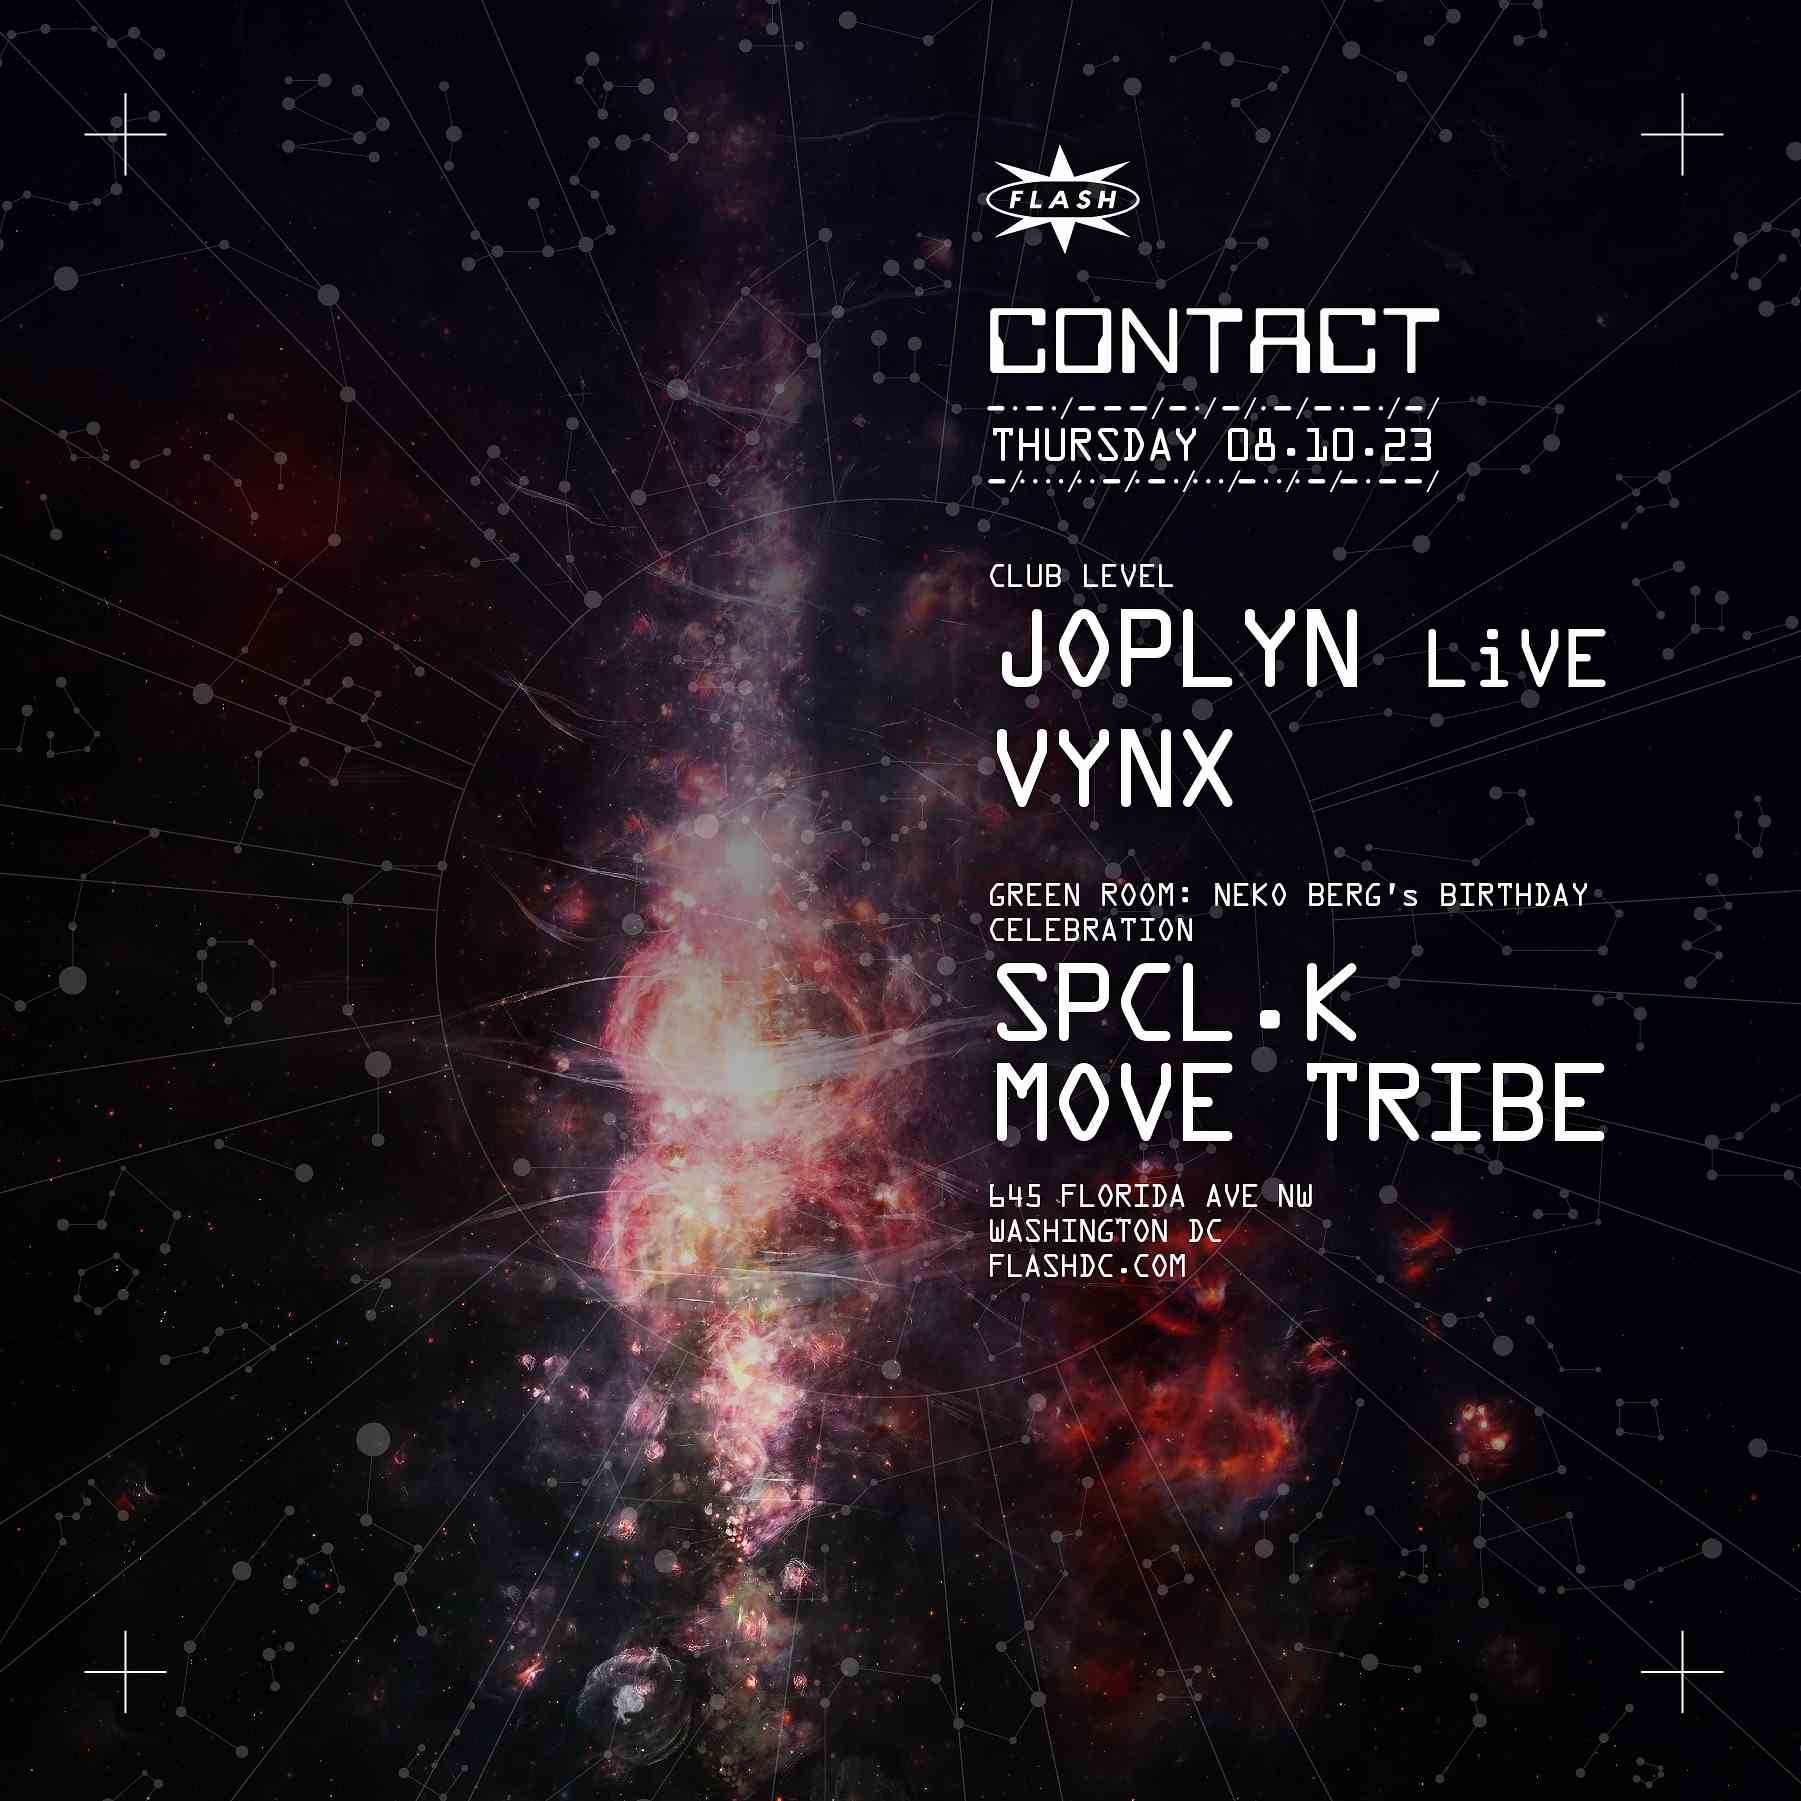 CONTACT: JOPLYN LiVE - VYNX event flyer